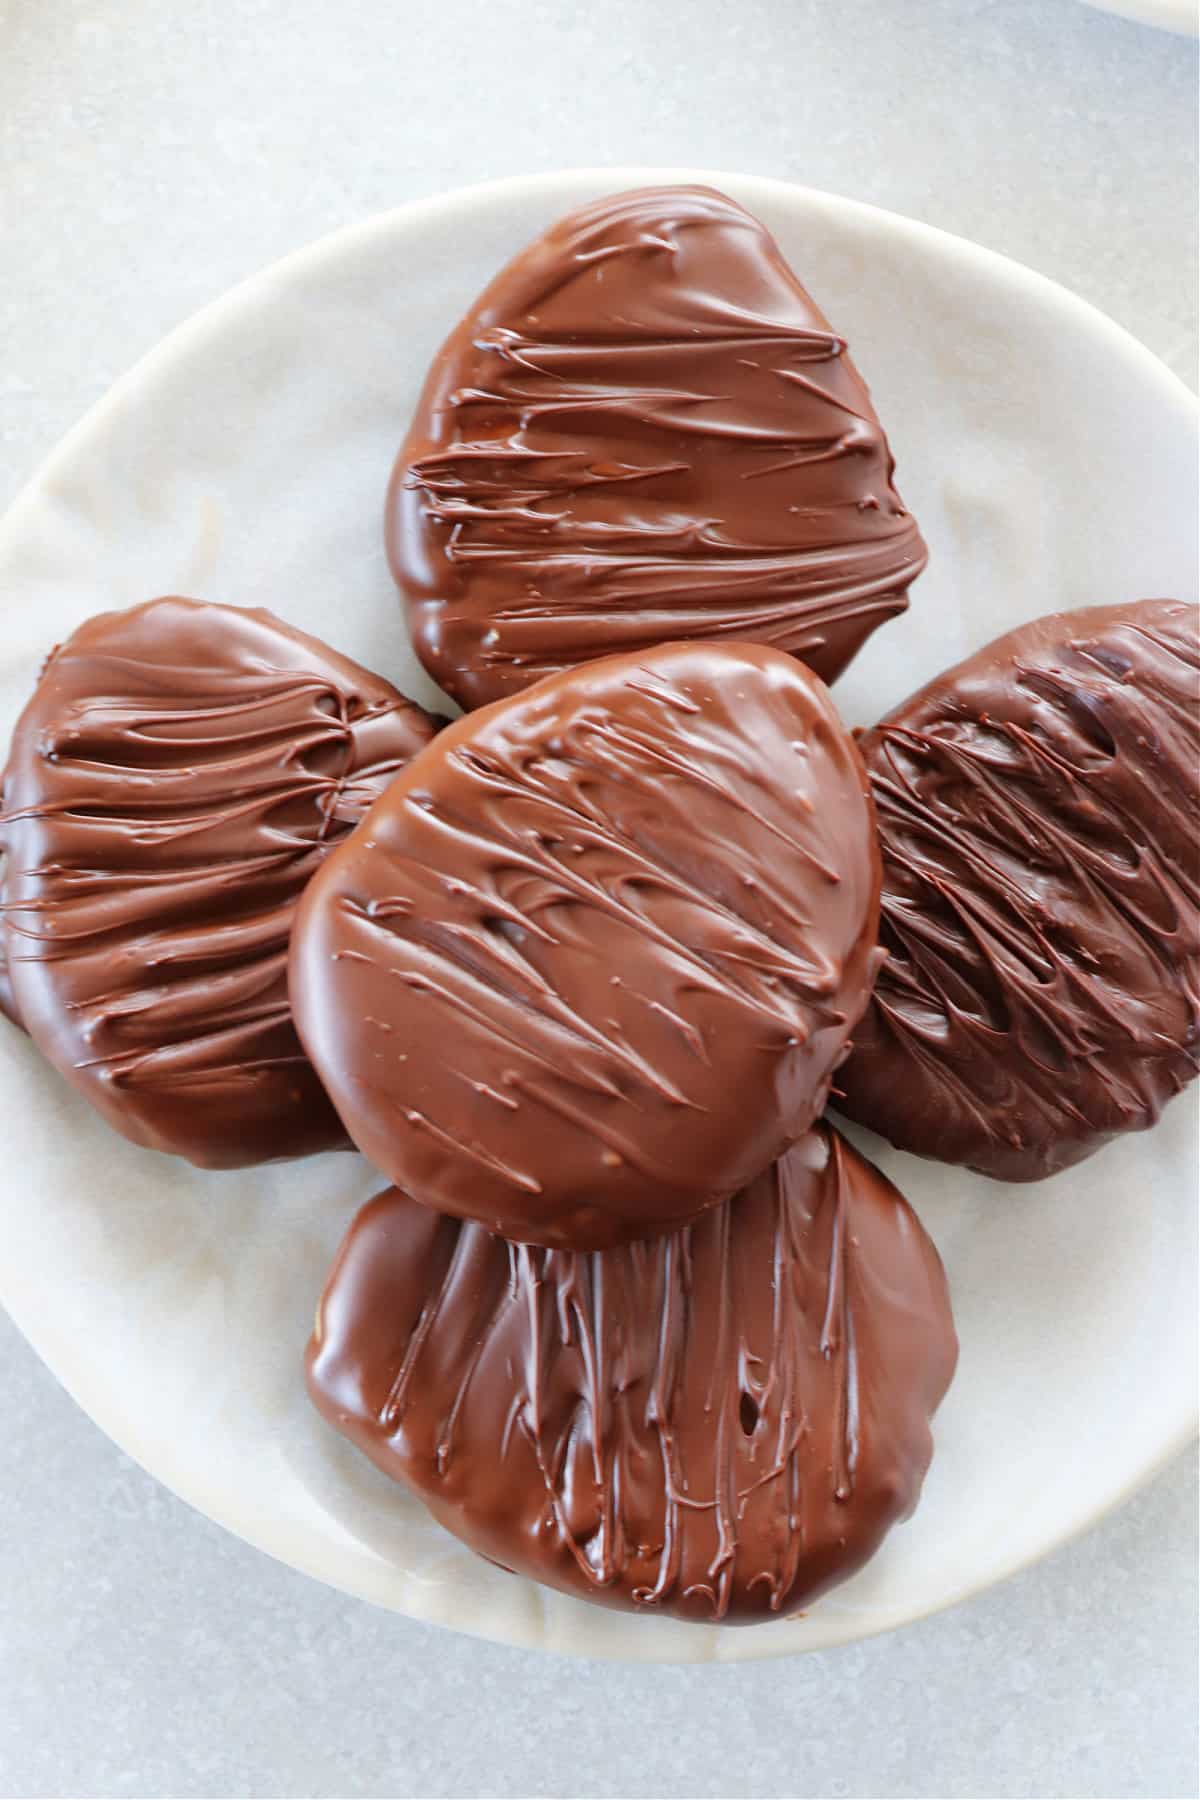 Chocolate covered peanut butter eggs on a cream plate.